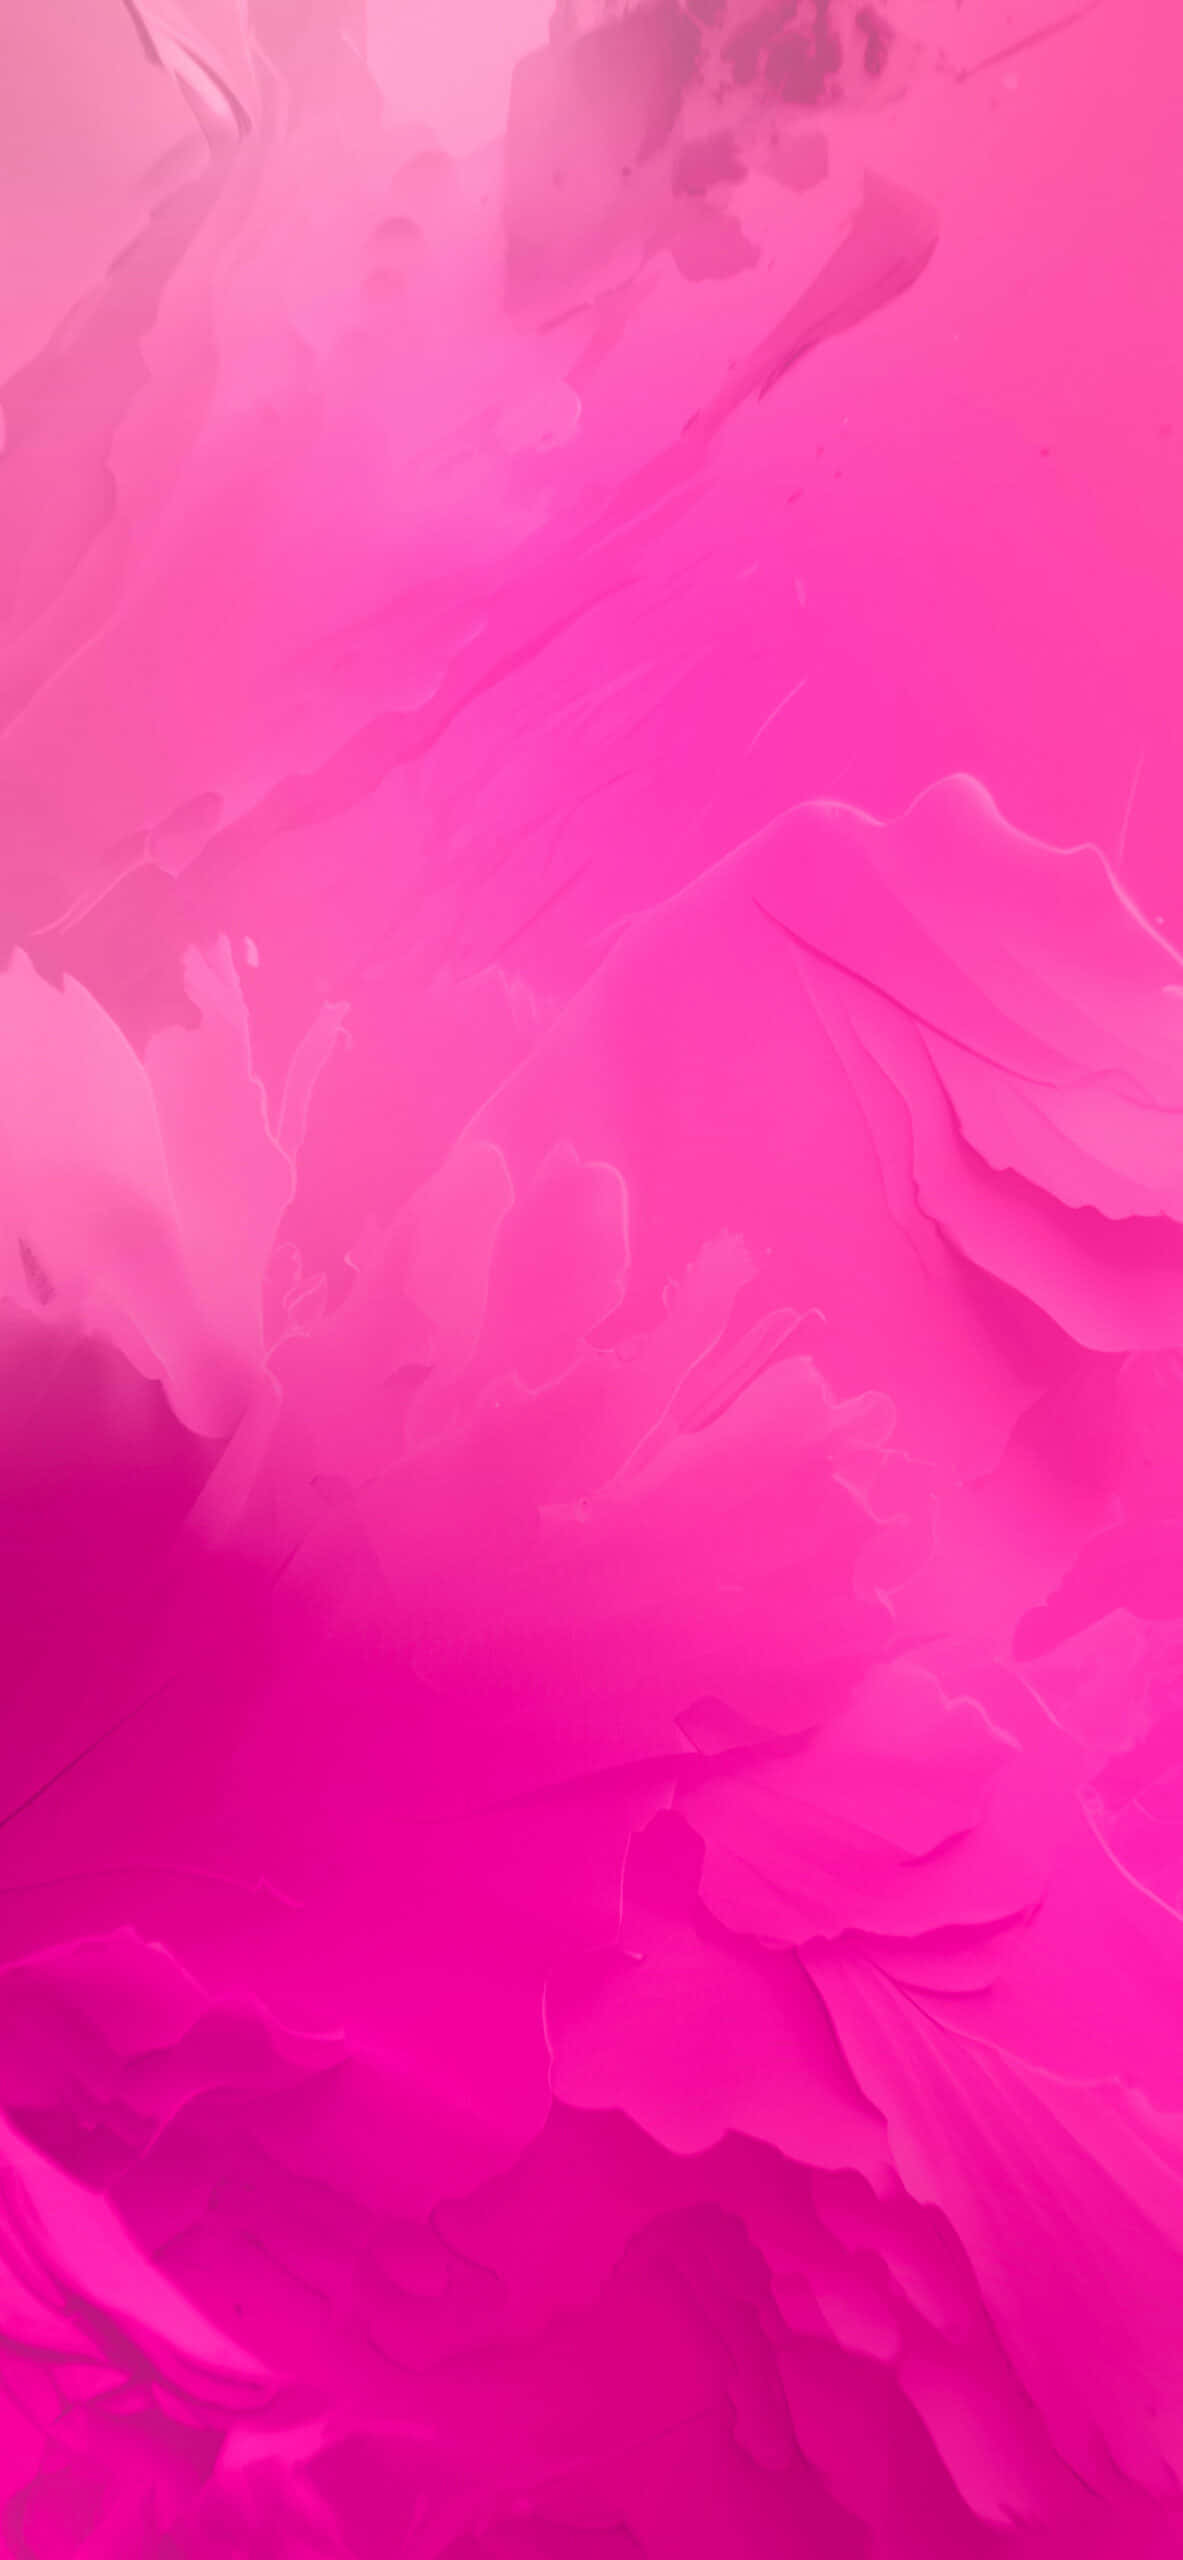 100+] Pink Phone Backgrounds, background wallpapers for phone